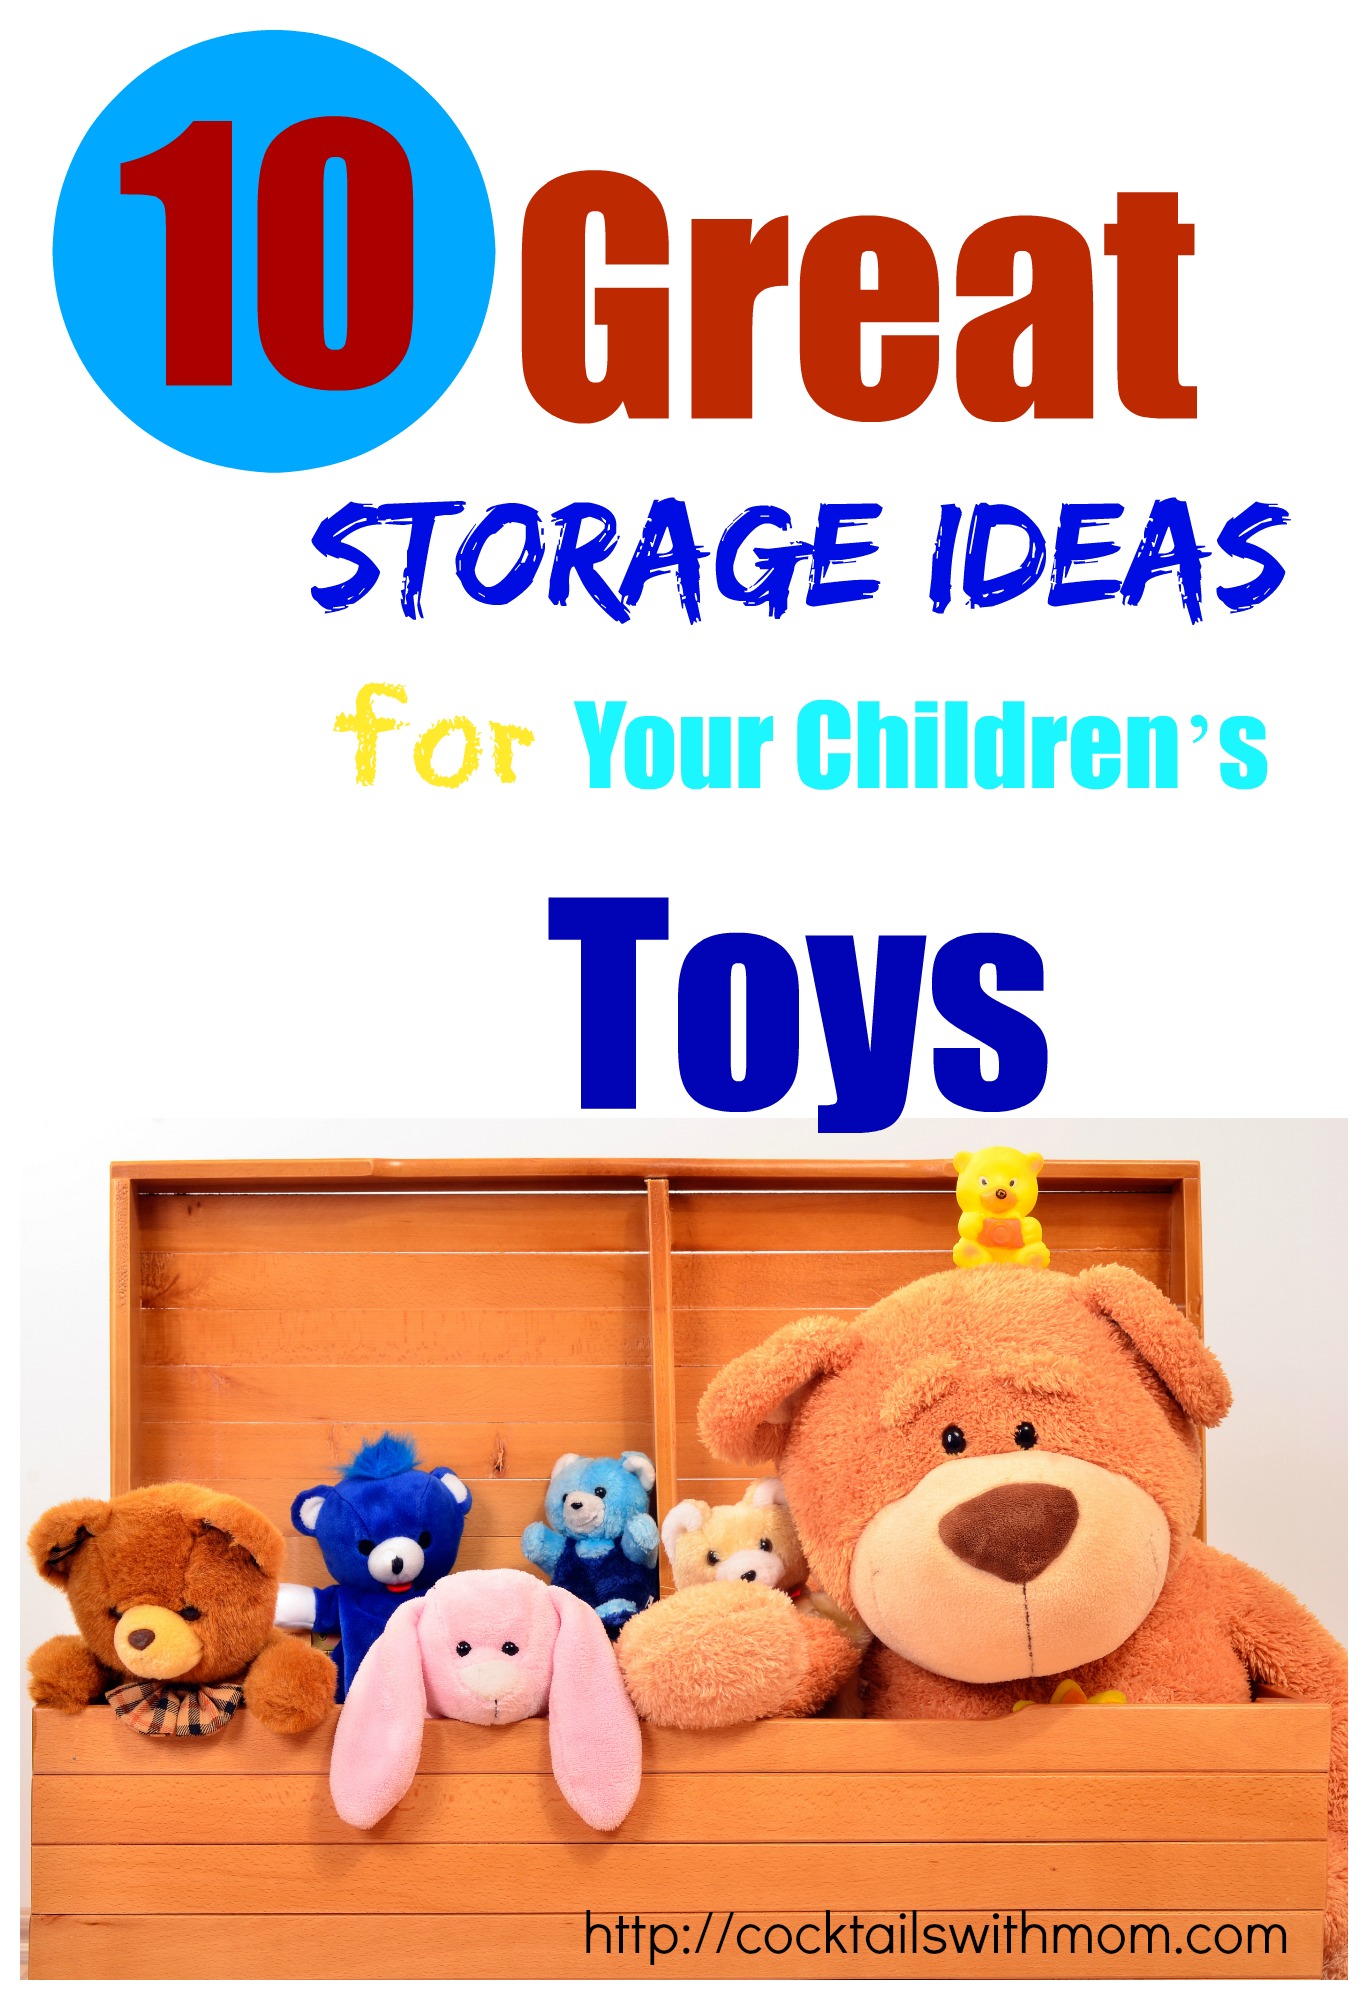 10 Great Storage Ideas for Your Children’s Toys